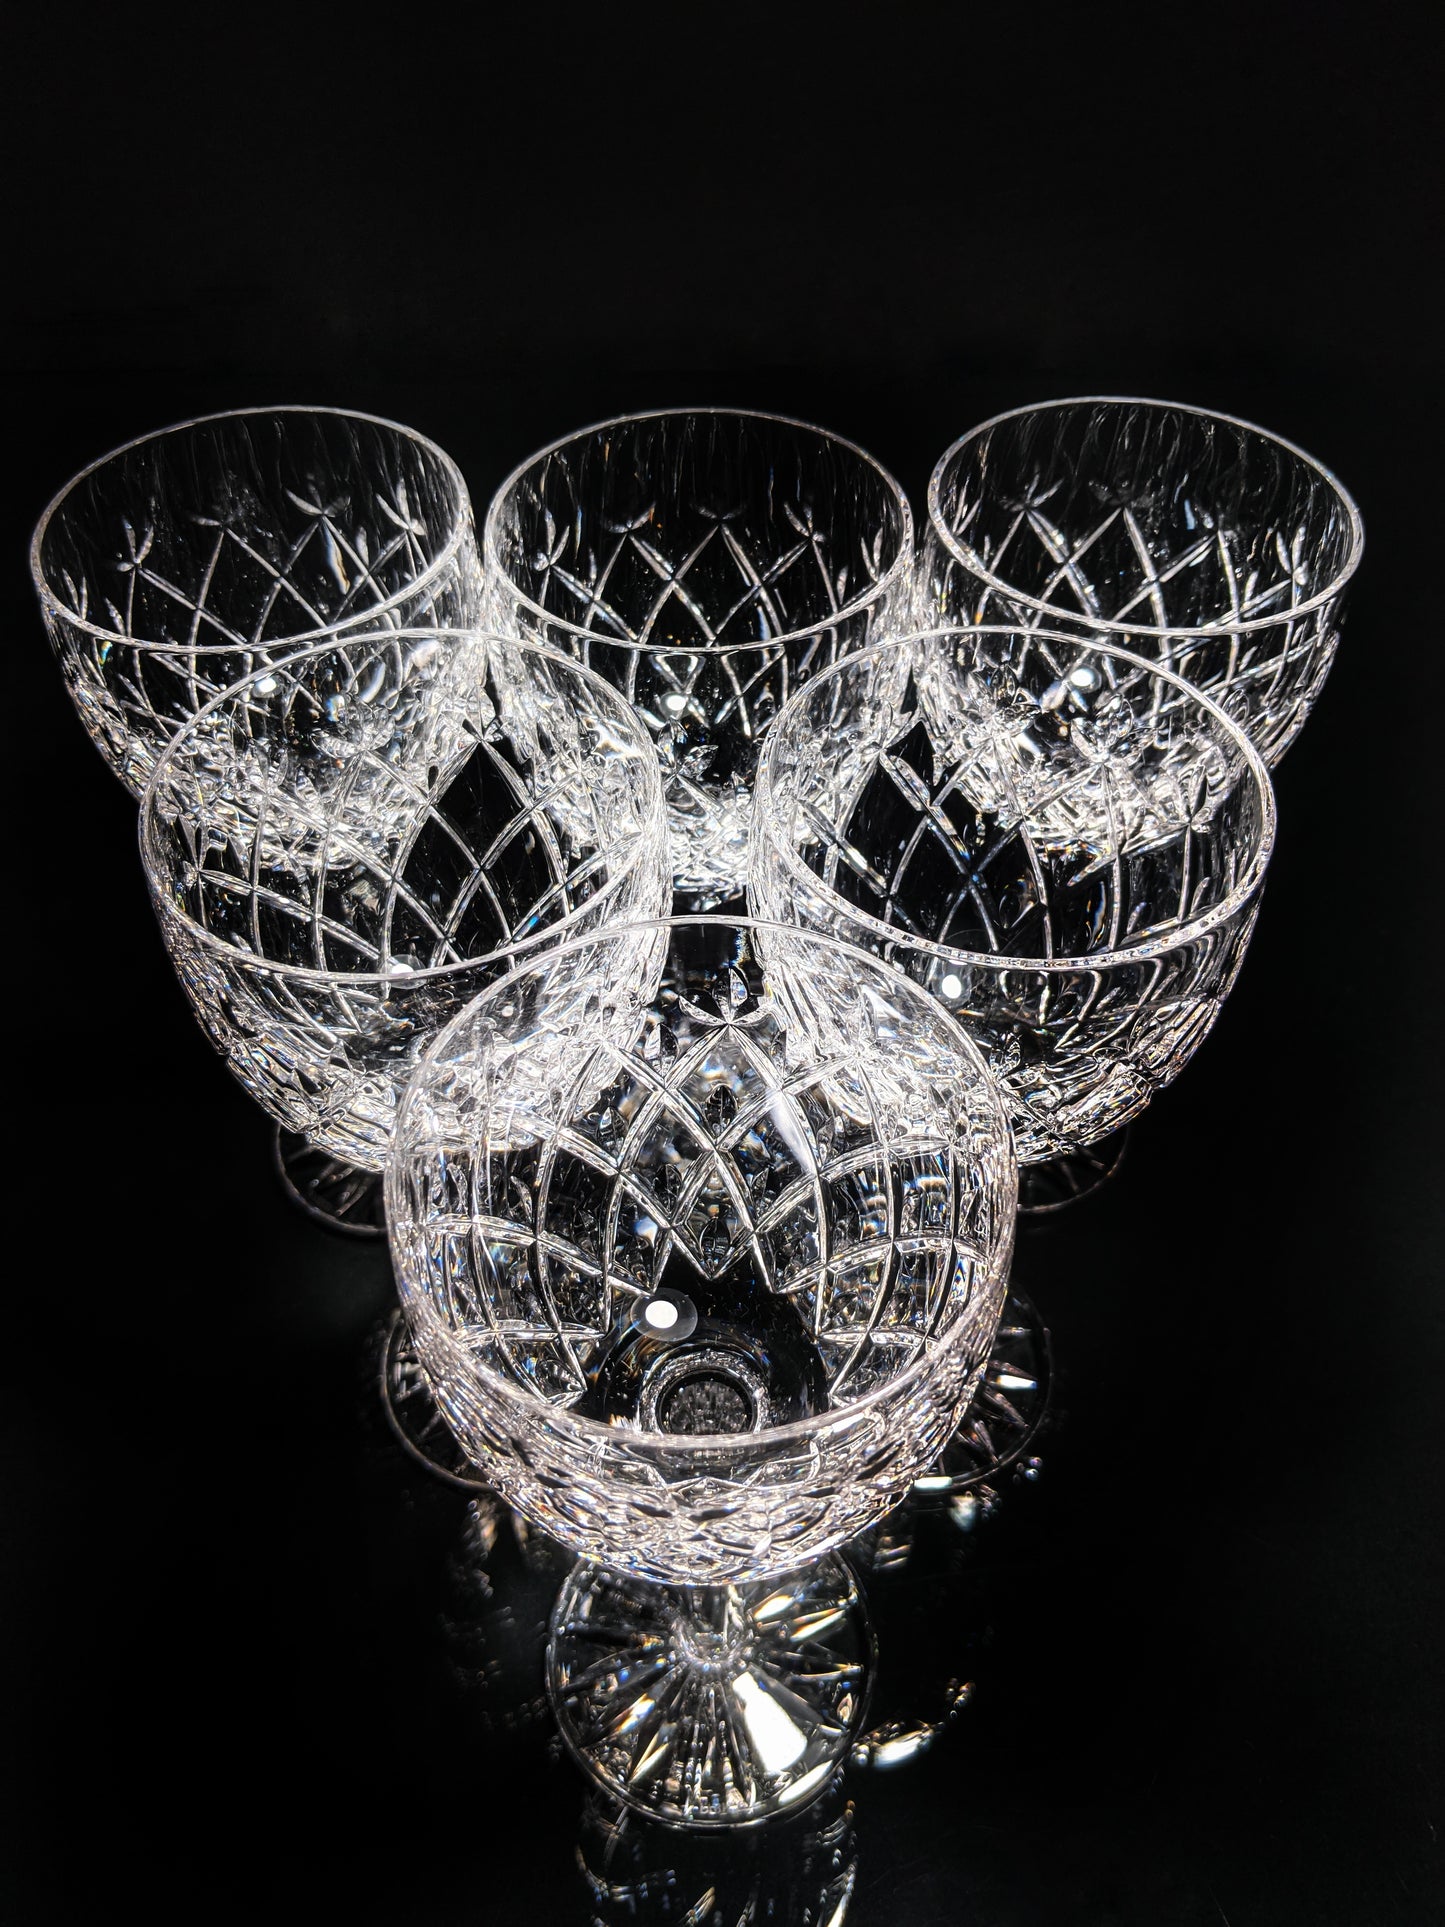 Faberge Clear Crystal Goblets